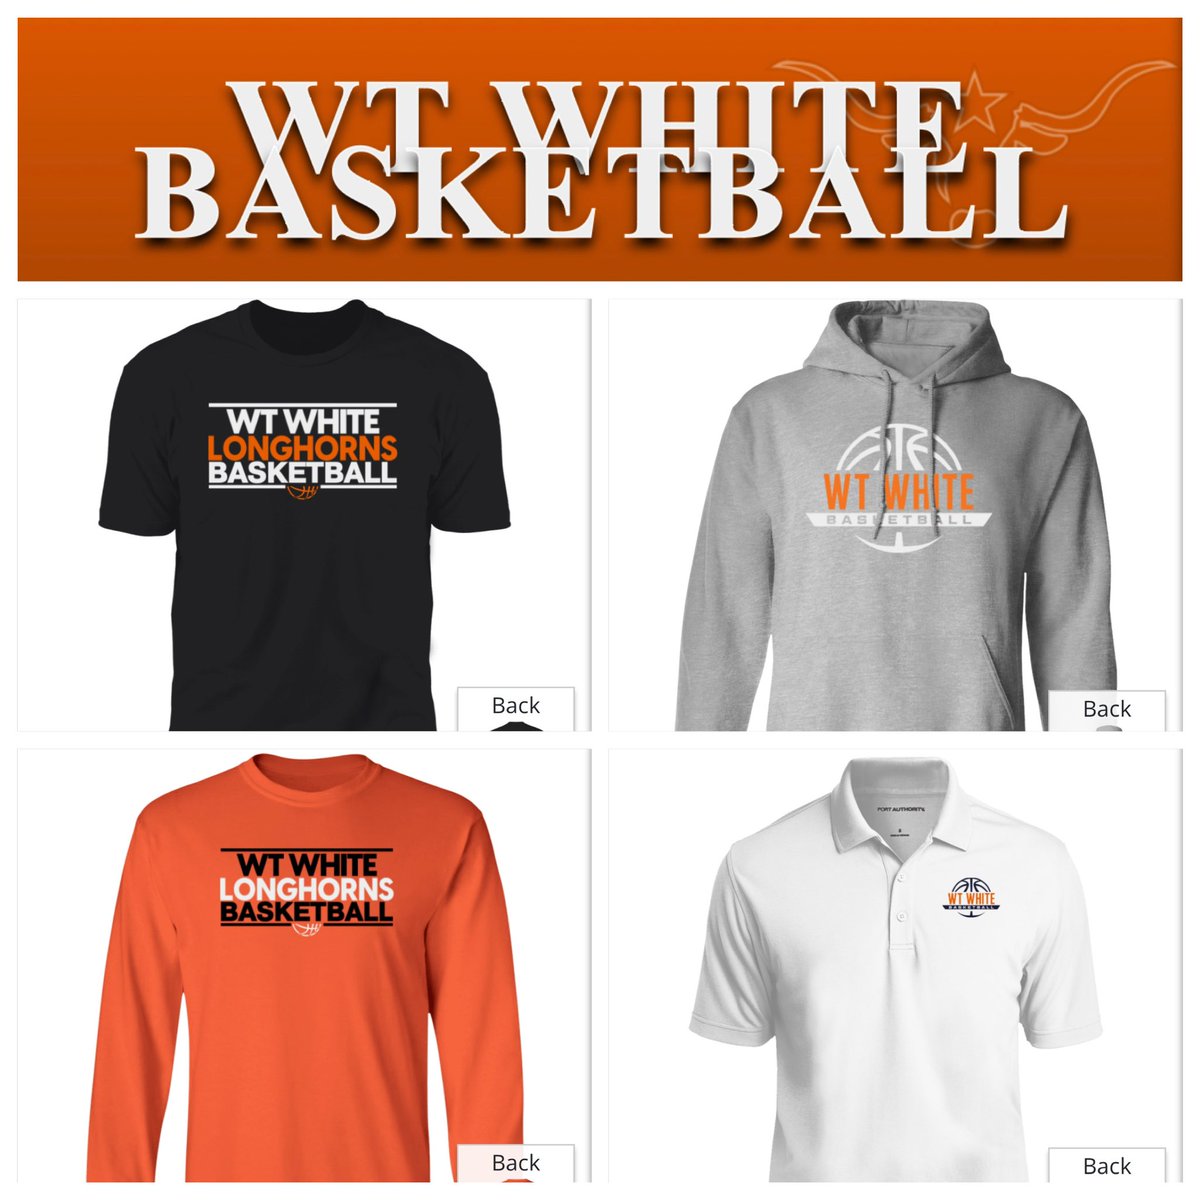 Longhorns basketball custom apparel online store is now live and available to you! Go get your Longhorns gear! Click the link below.🤘🏽
#WeAretheNorth #HornsUp #35South #PlayBigDallas #5A 

shop.verticalraise.com/shops/texas/da…